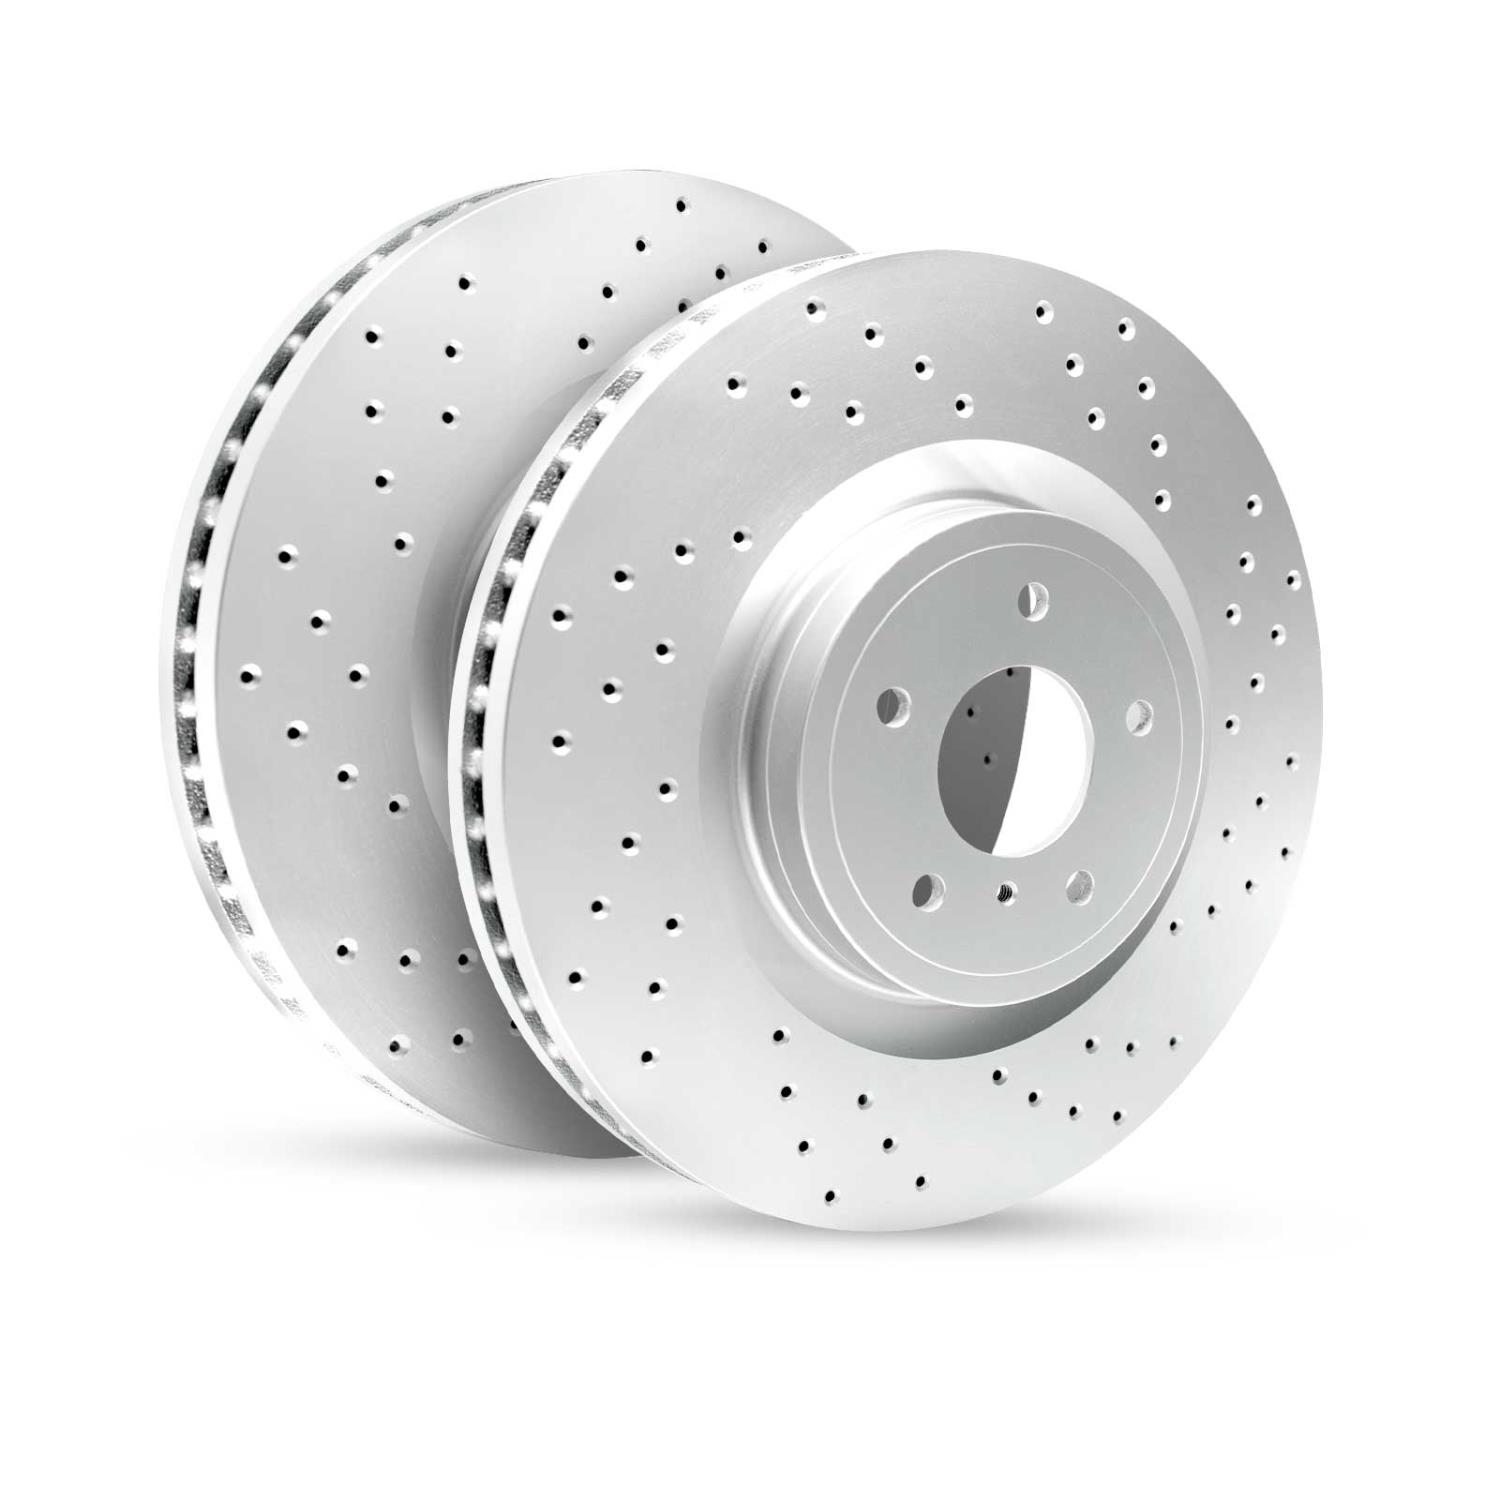 GEO-Carbon Drilled/Slotted Rotors, 1990-1998 Mercedes-Benz,